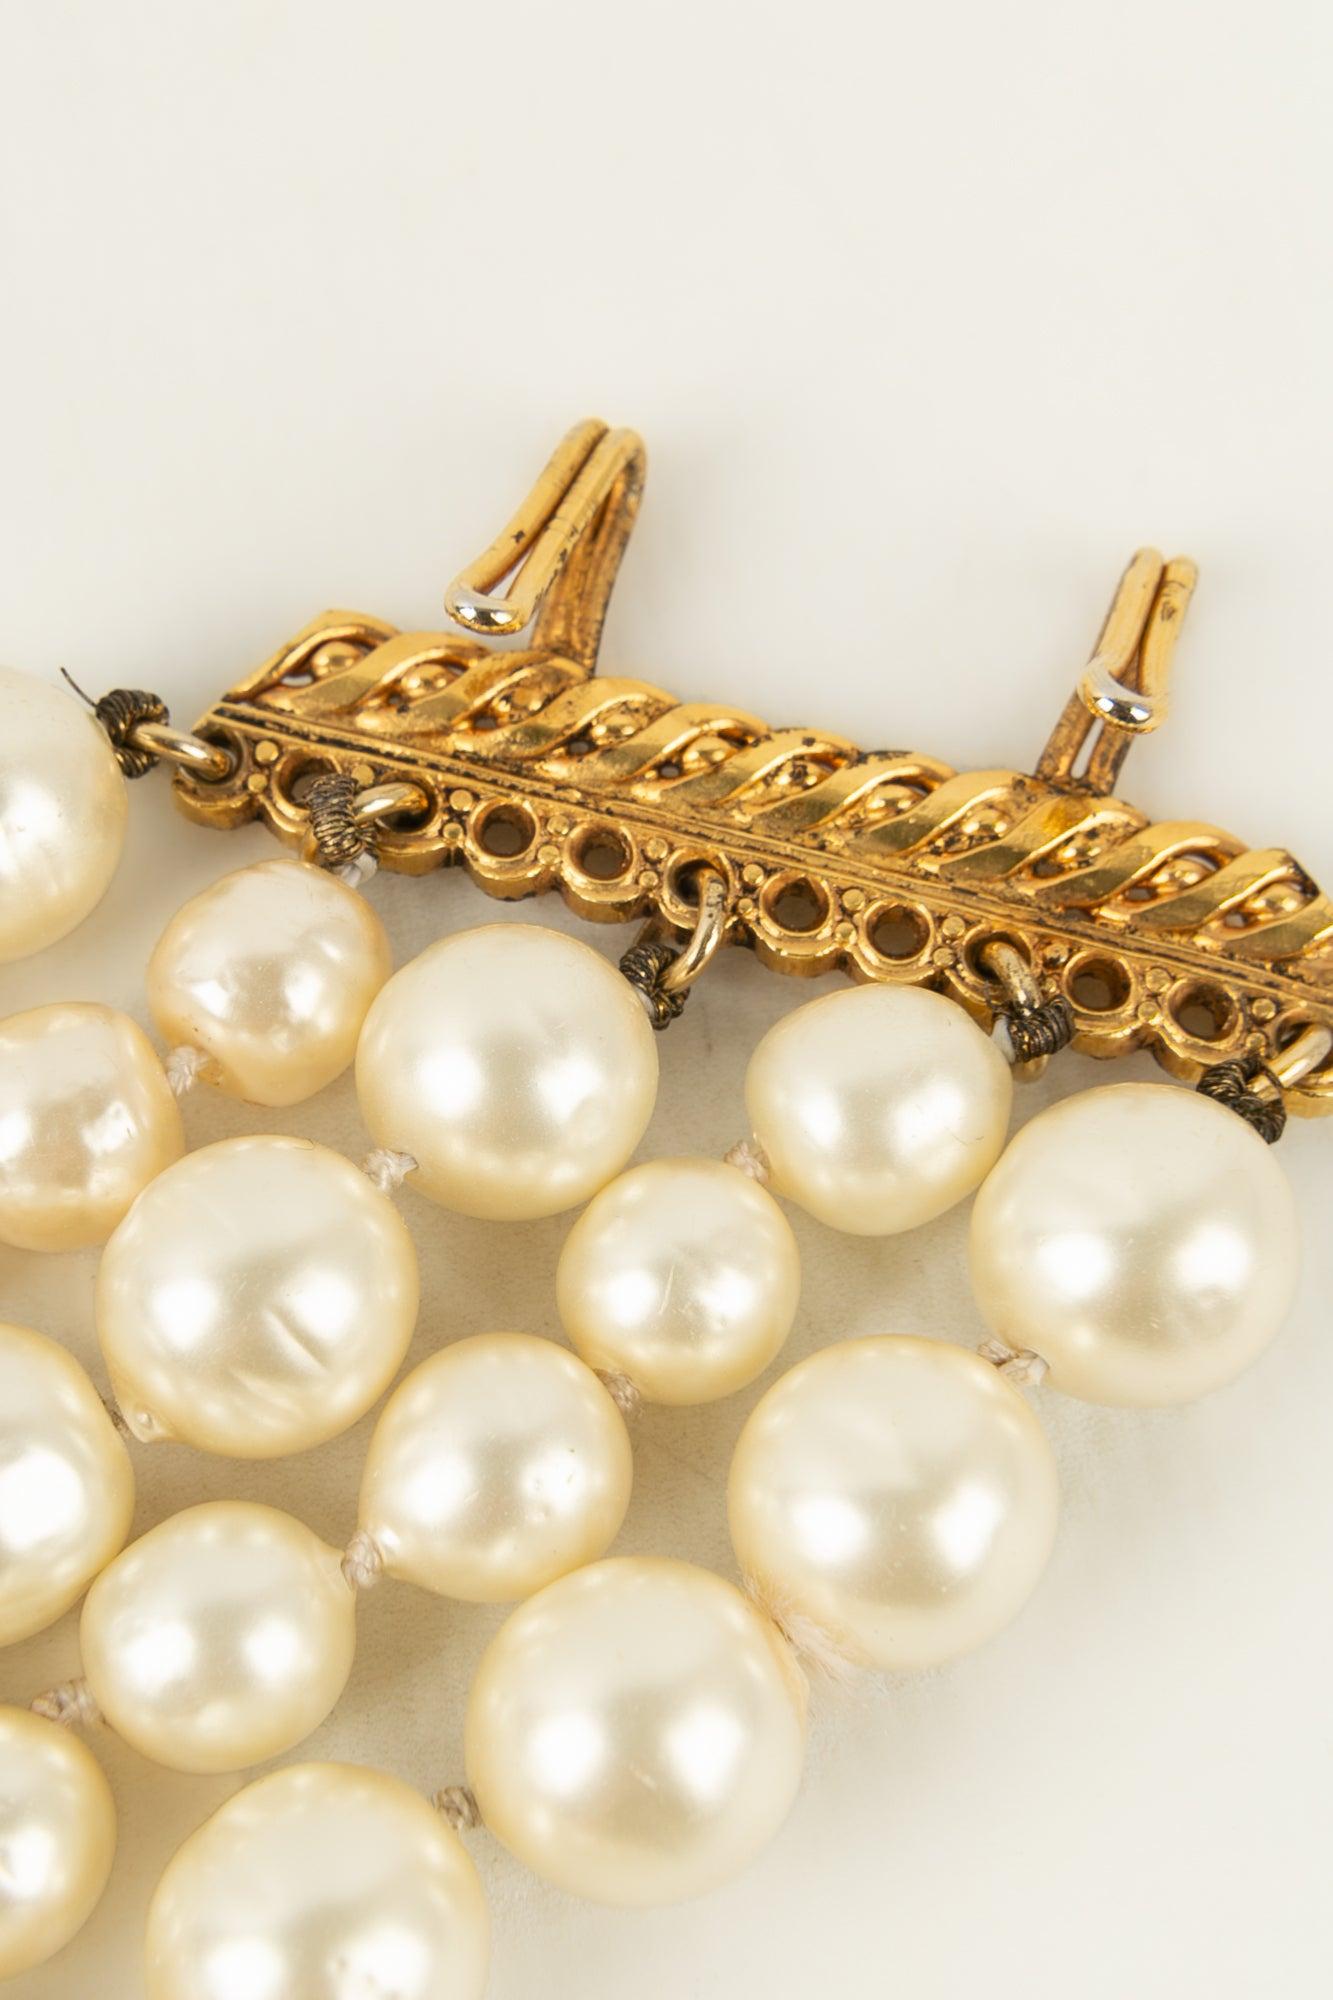 Chanel Bracelet with Pearly Beads and a Fastener in Golden Metal, 1980s For Sale 1